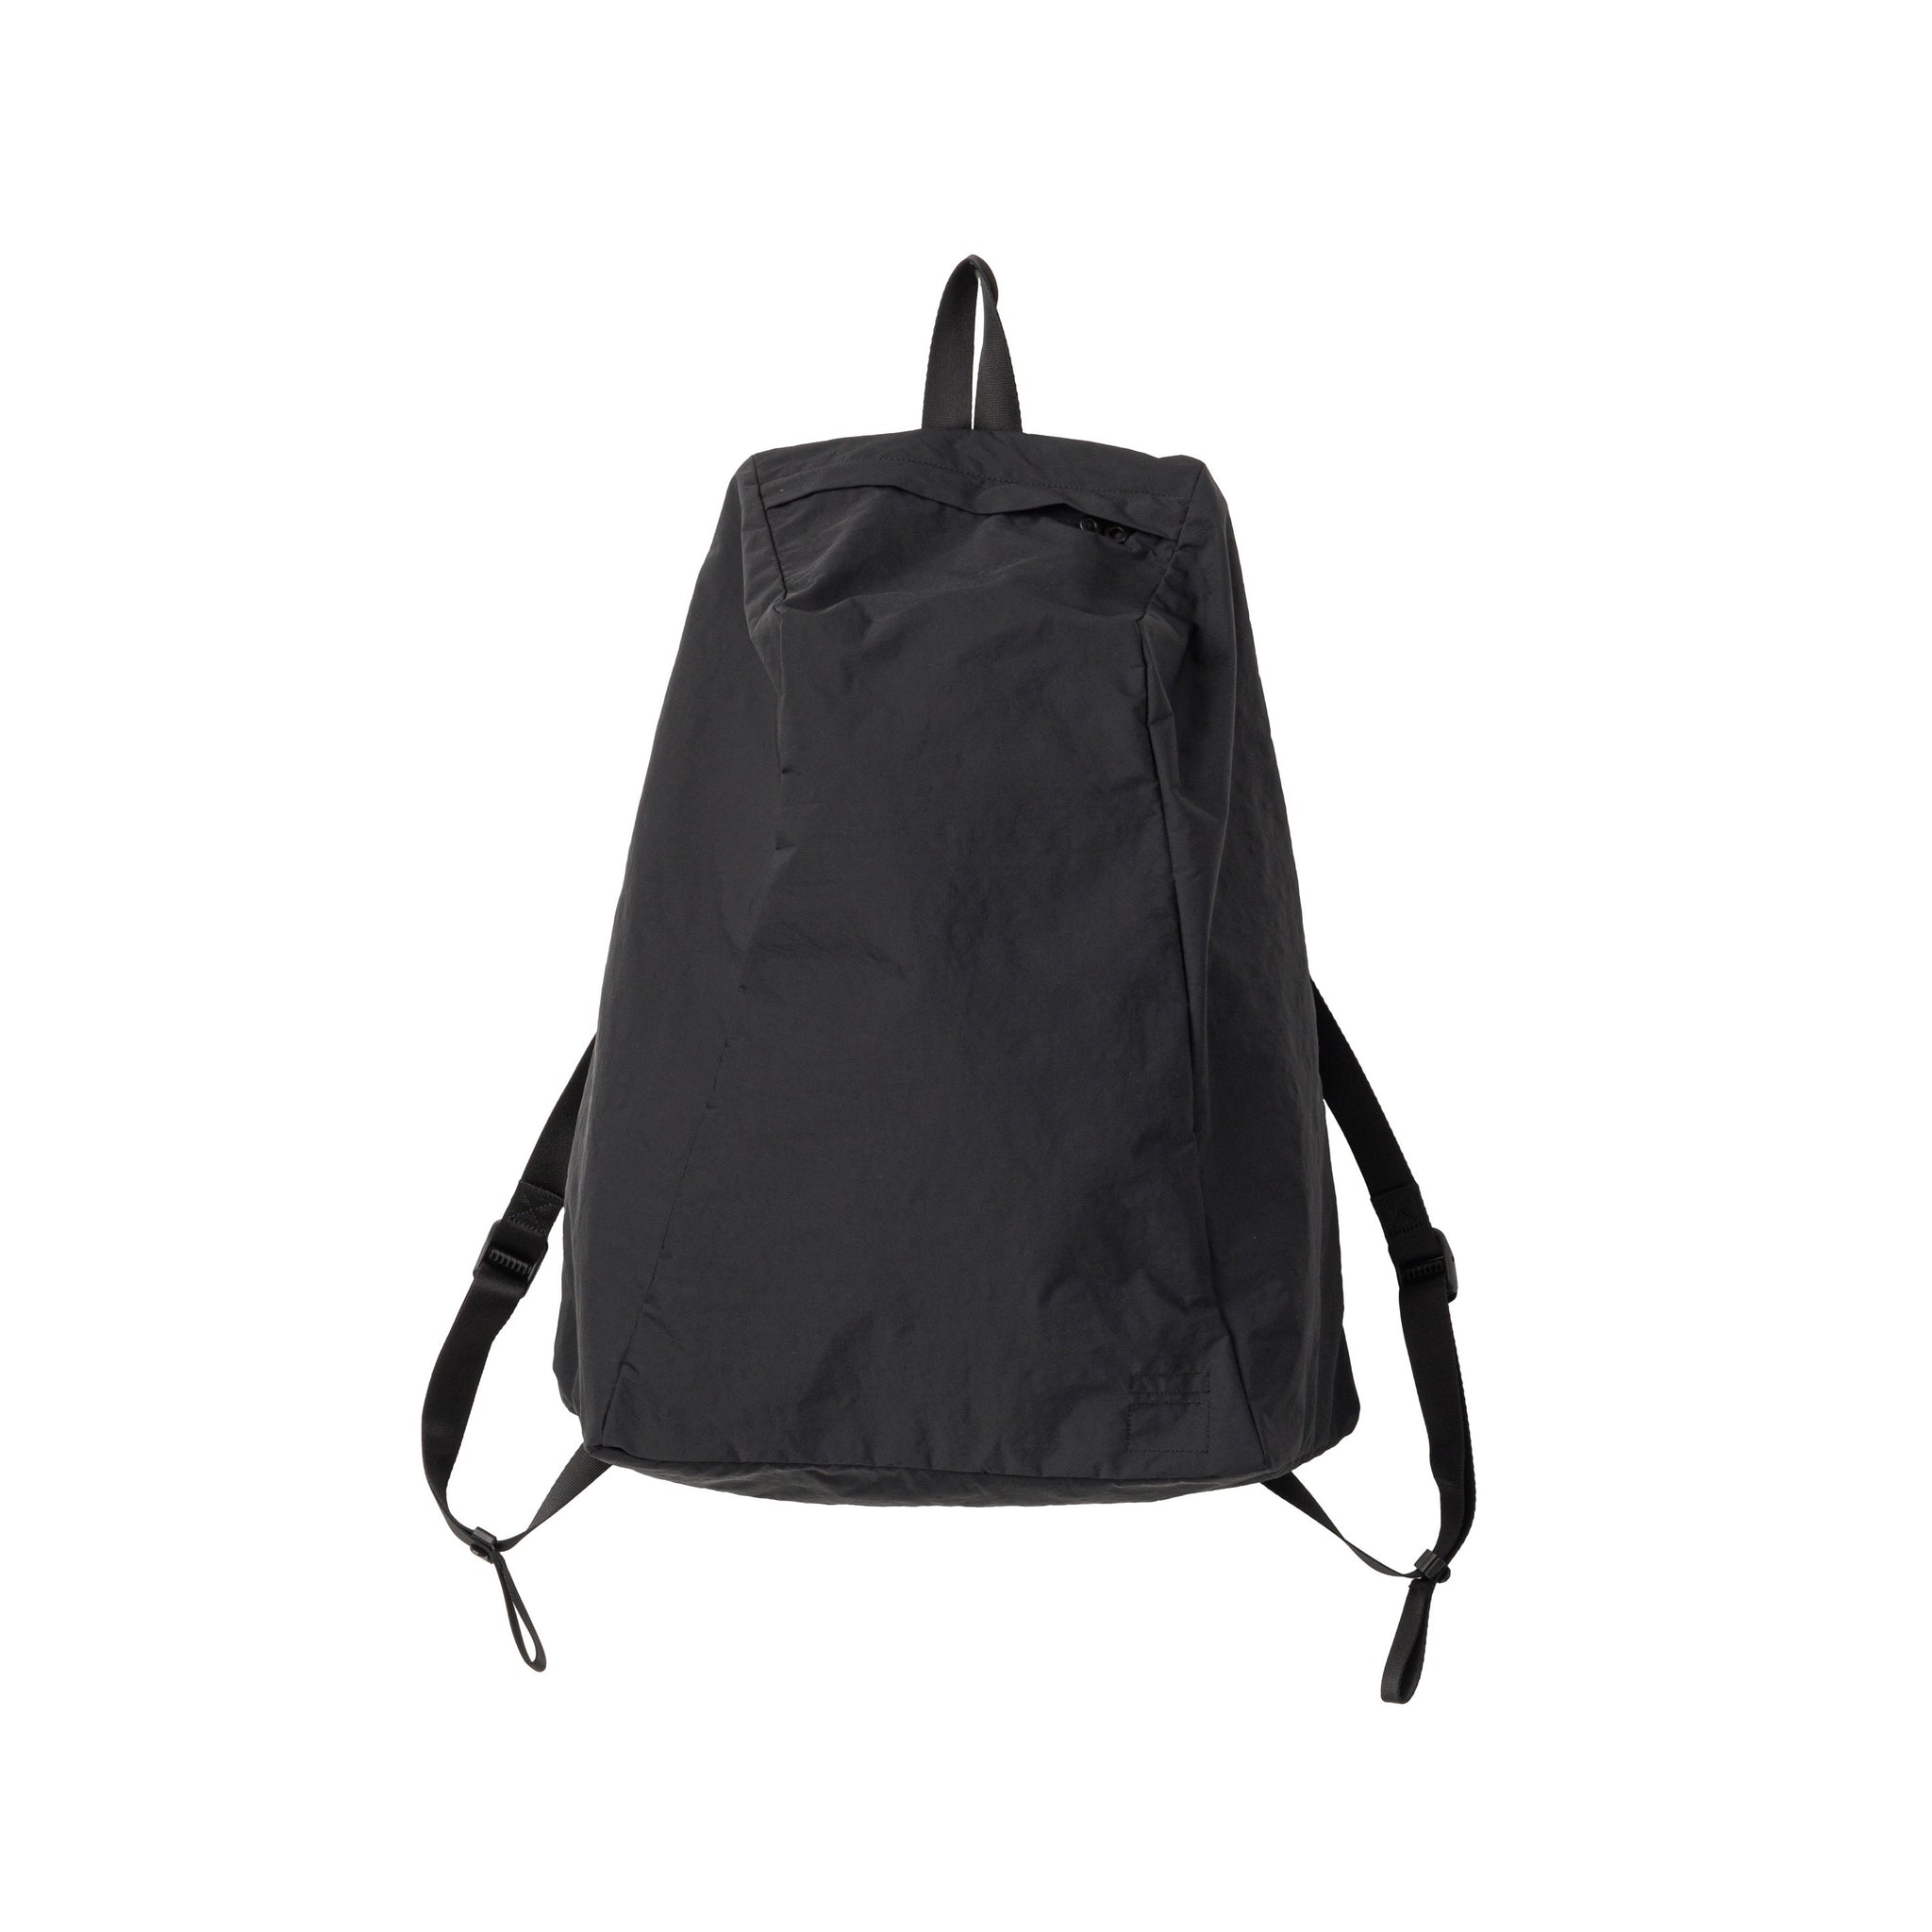 Blankof for Graphpaper Back Pack ”TRAPEZOID”